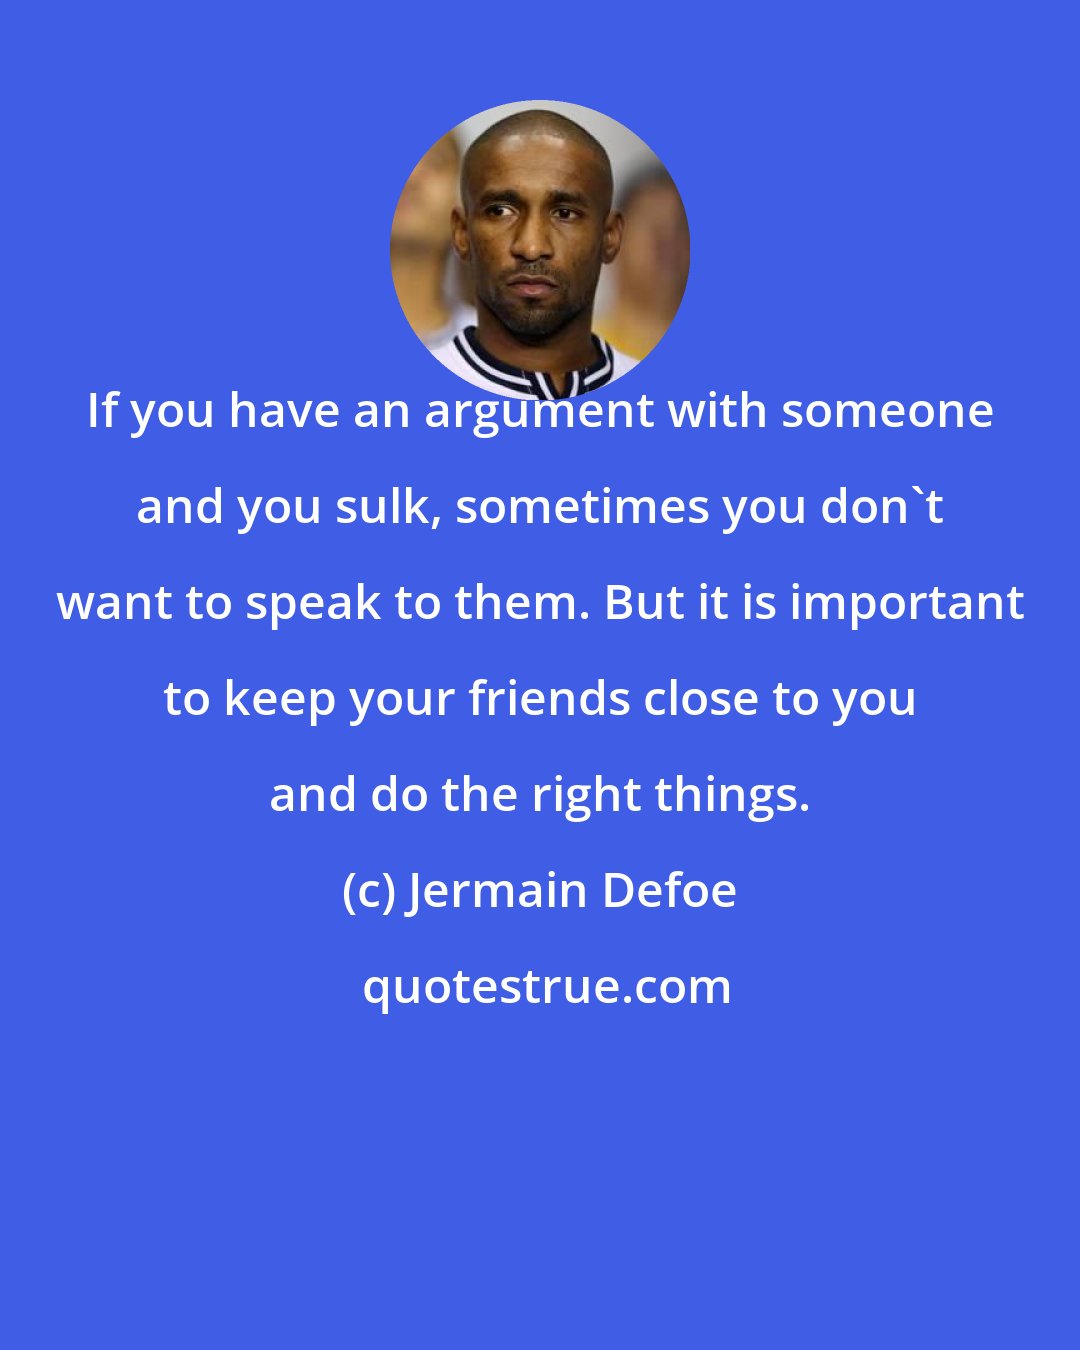 Jermain Defoe: If you have an argument with someone and you sulk, sometimes you don't want to speak to them. But it is important to keep your friends close to you and do the right things.